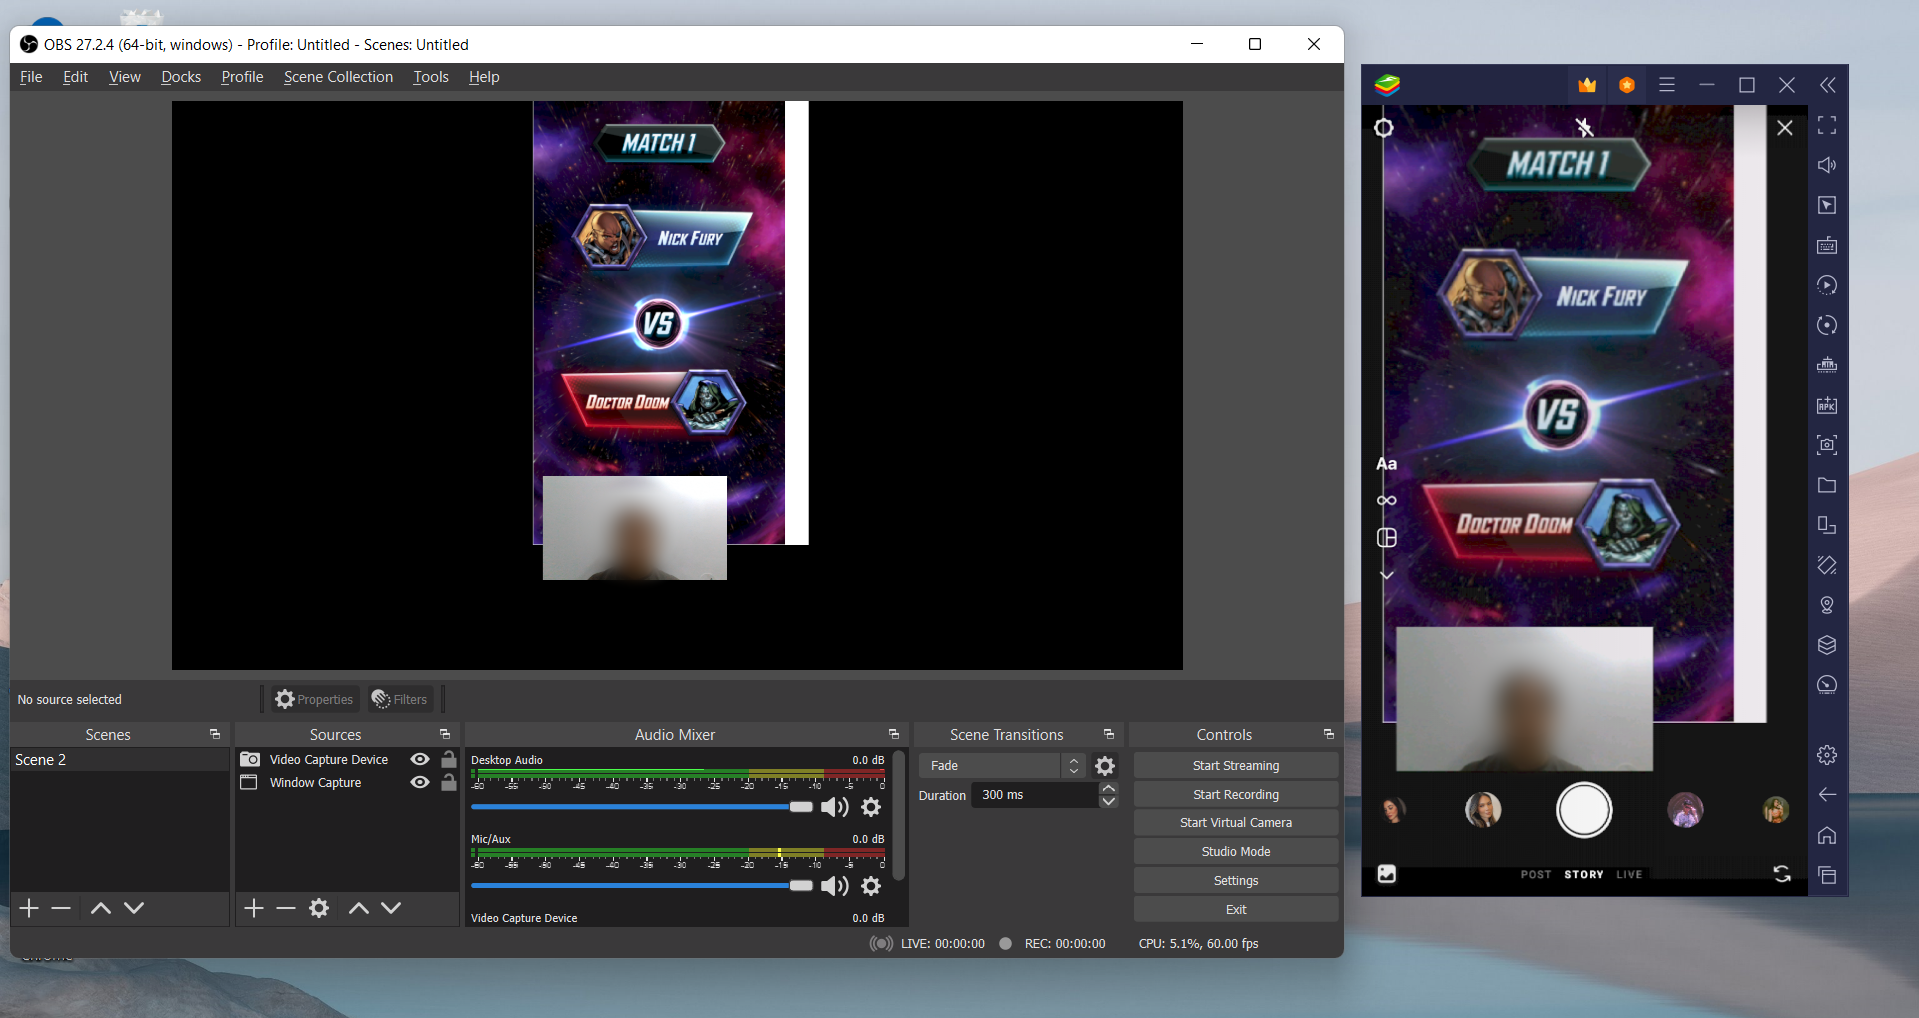 BlueStacks 5.10 Implements OBS Virtual Camera Support - Stream Gameplay Directly on Instagram and TikTok